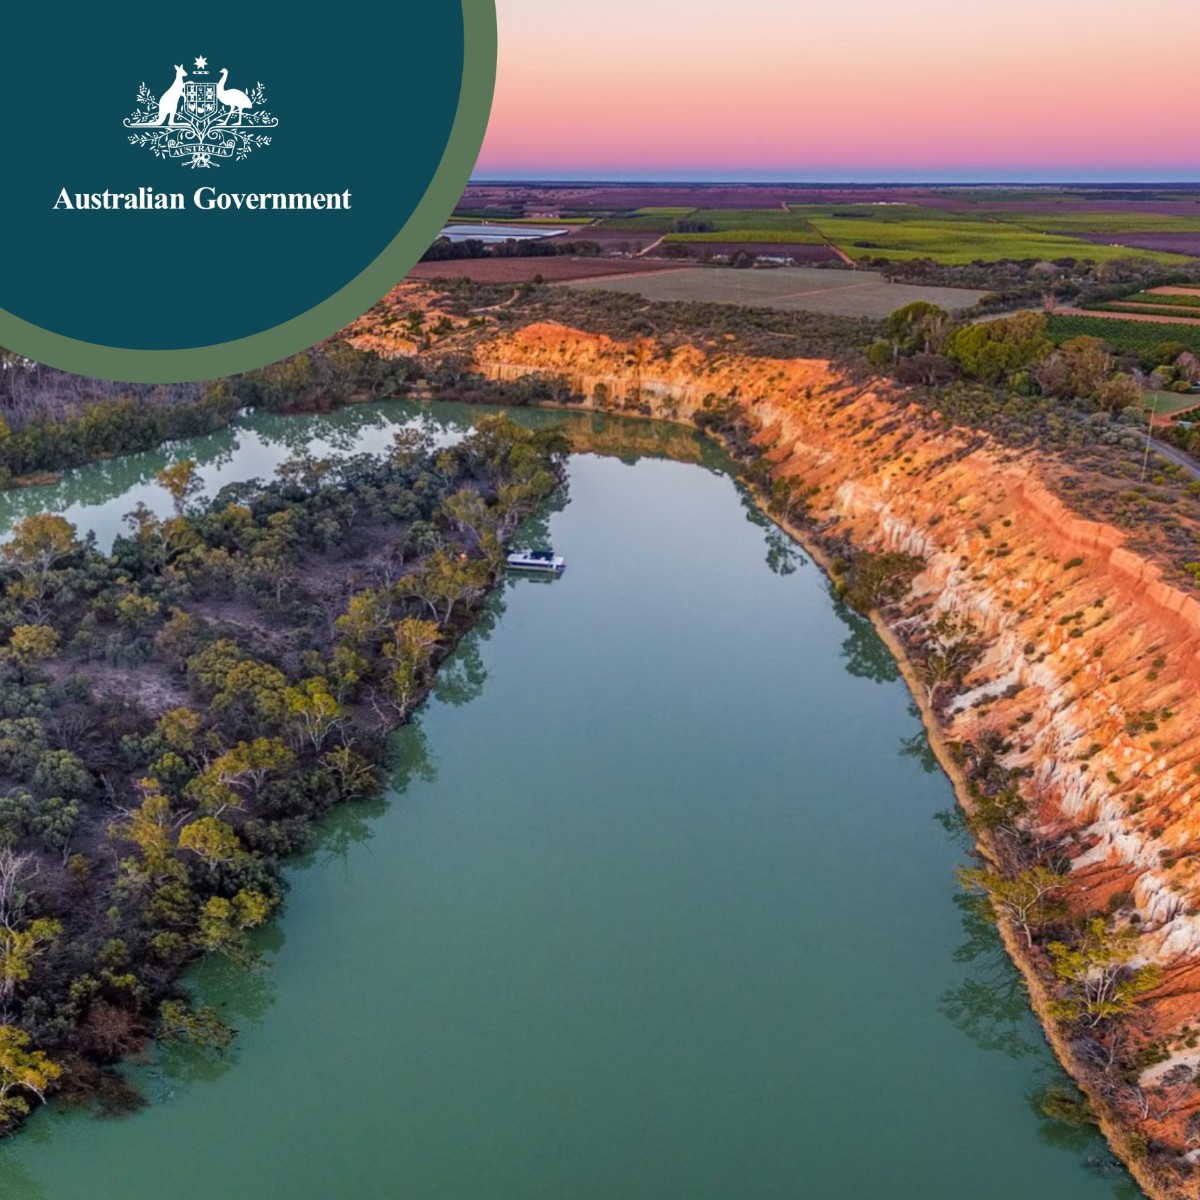 The #MurrayDarlingBasin is a lifeline for communities and ecosystems that spans 4 states and a territory 🌏 With the Basin Plan, we're committed to restoring our rivers to health by returning water & upgrading infrastructure. Learn more about our plan brnw.ch/21wIVUj